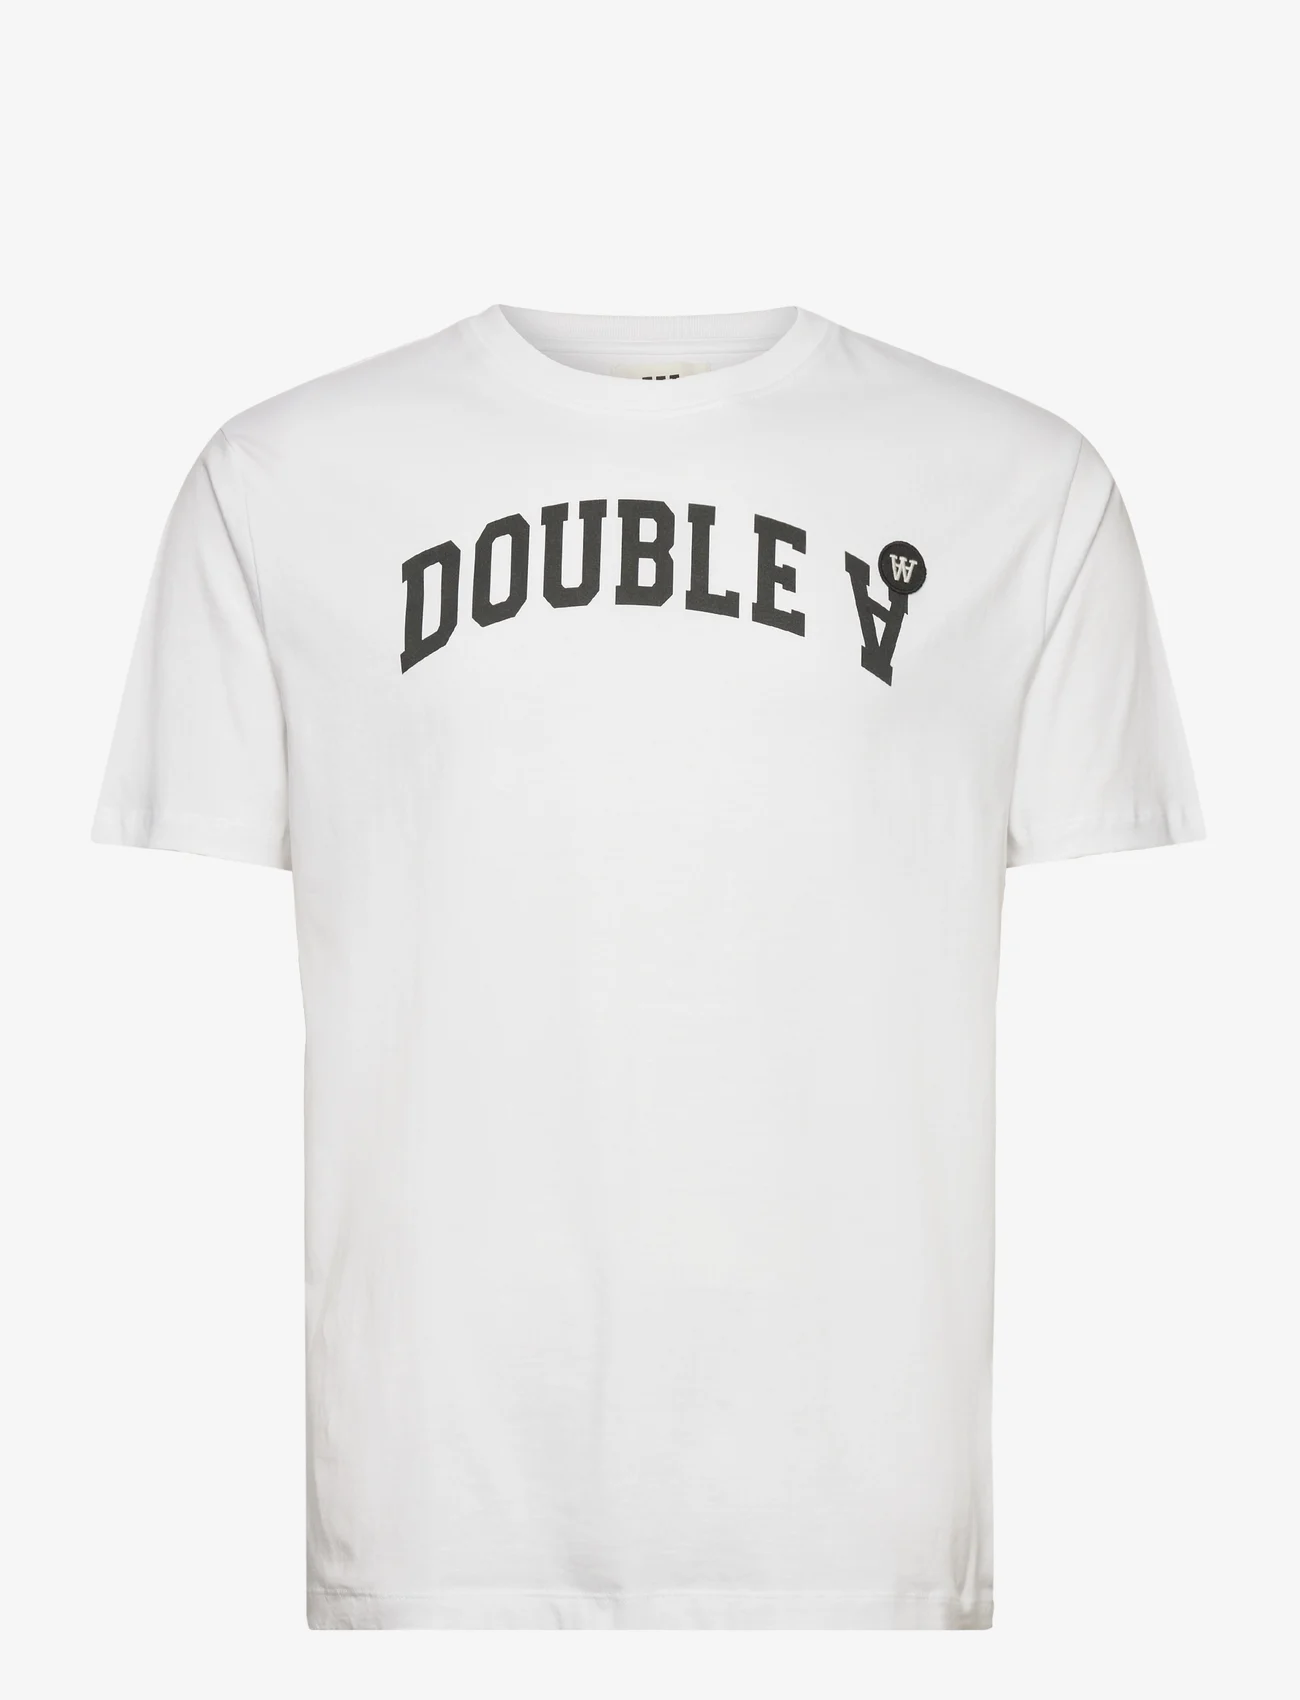 Double A by Wood Wood - Ace IVY T-shirt GOTS - kortærmede t-shirts - white - 0